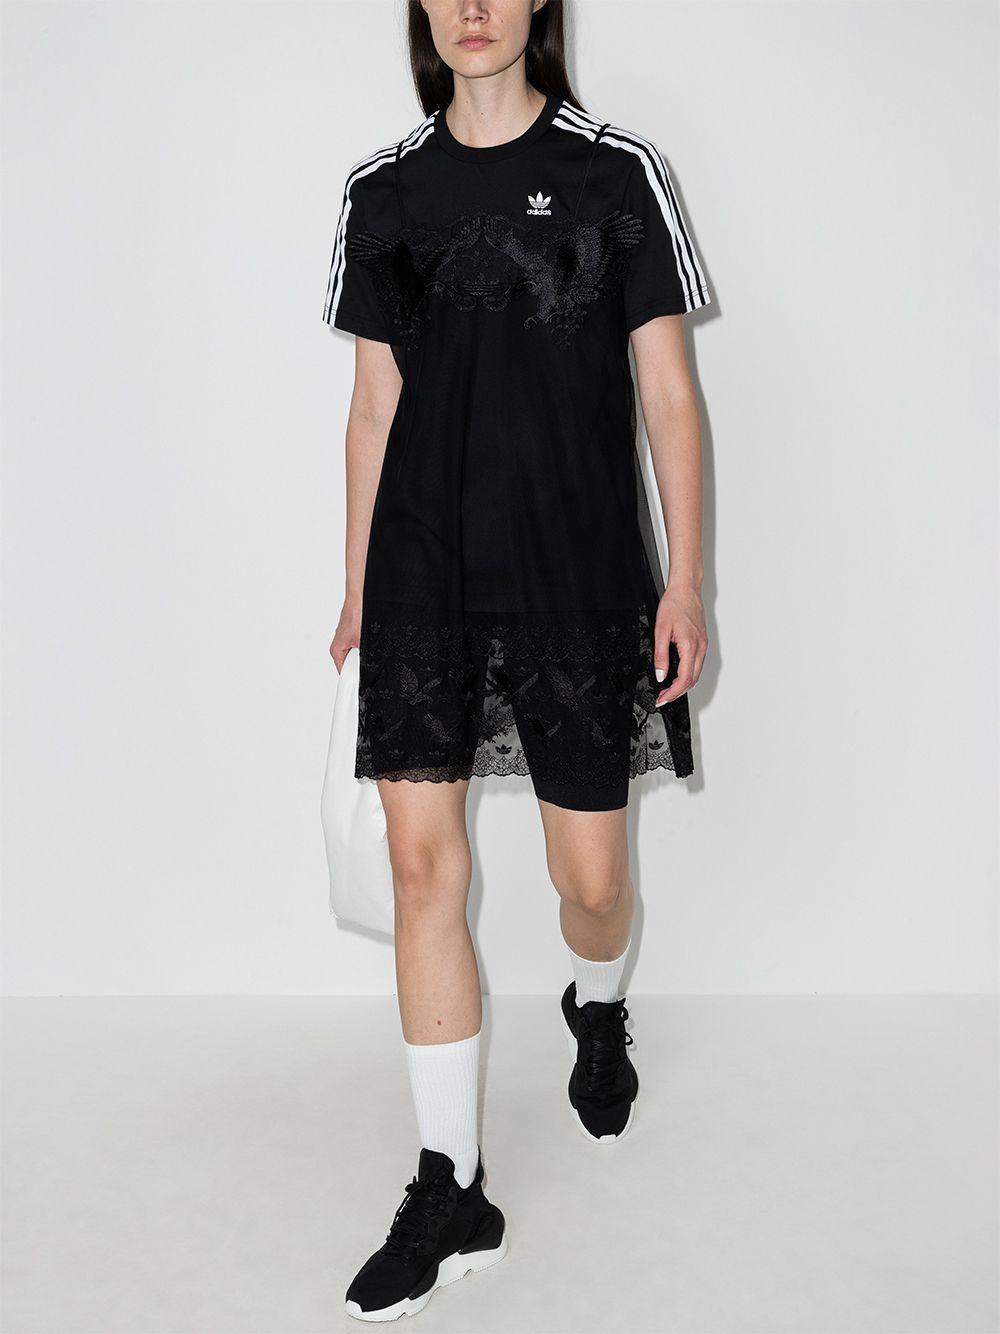 adidas X Dry Clean Only Lace-overlay T-shirt Dress in Black | Lyst UK